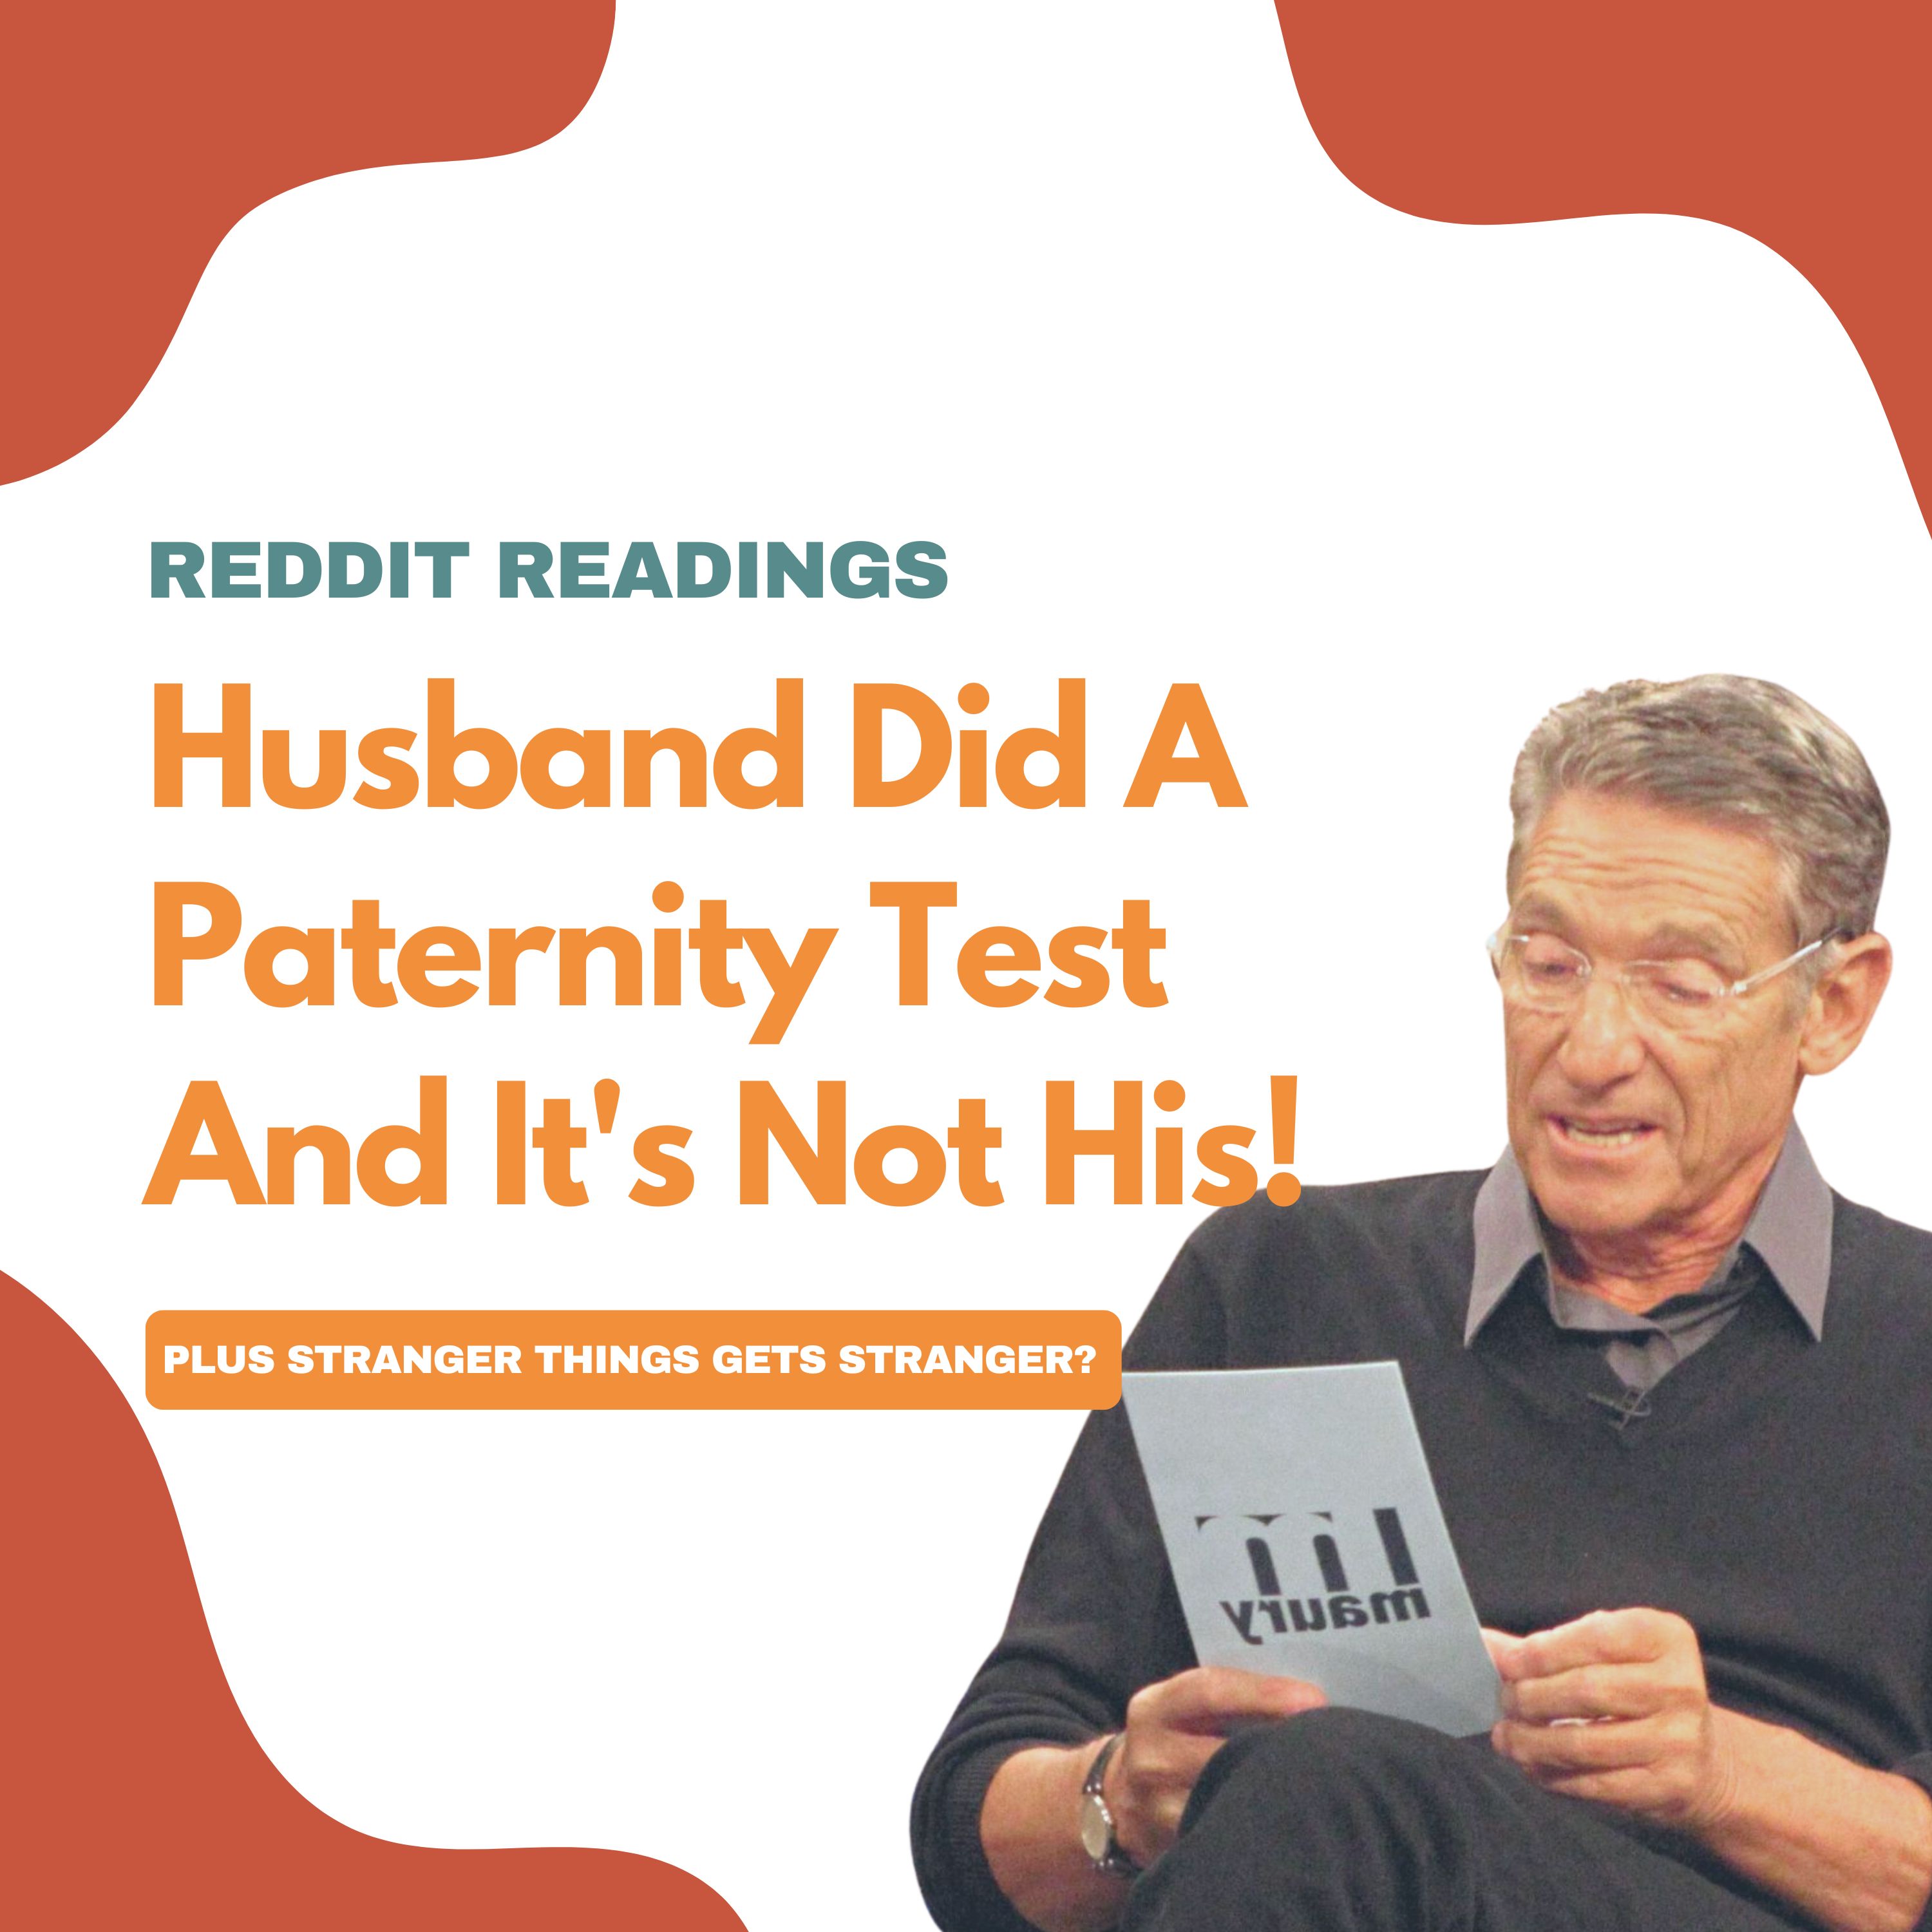 Reddit Readings | Husband Did A Paternity Test And It's Not His! Image